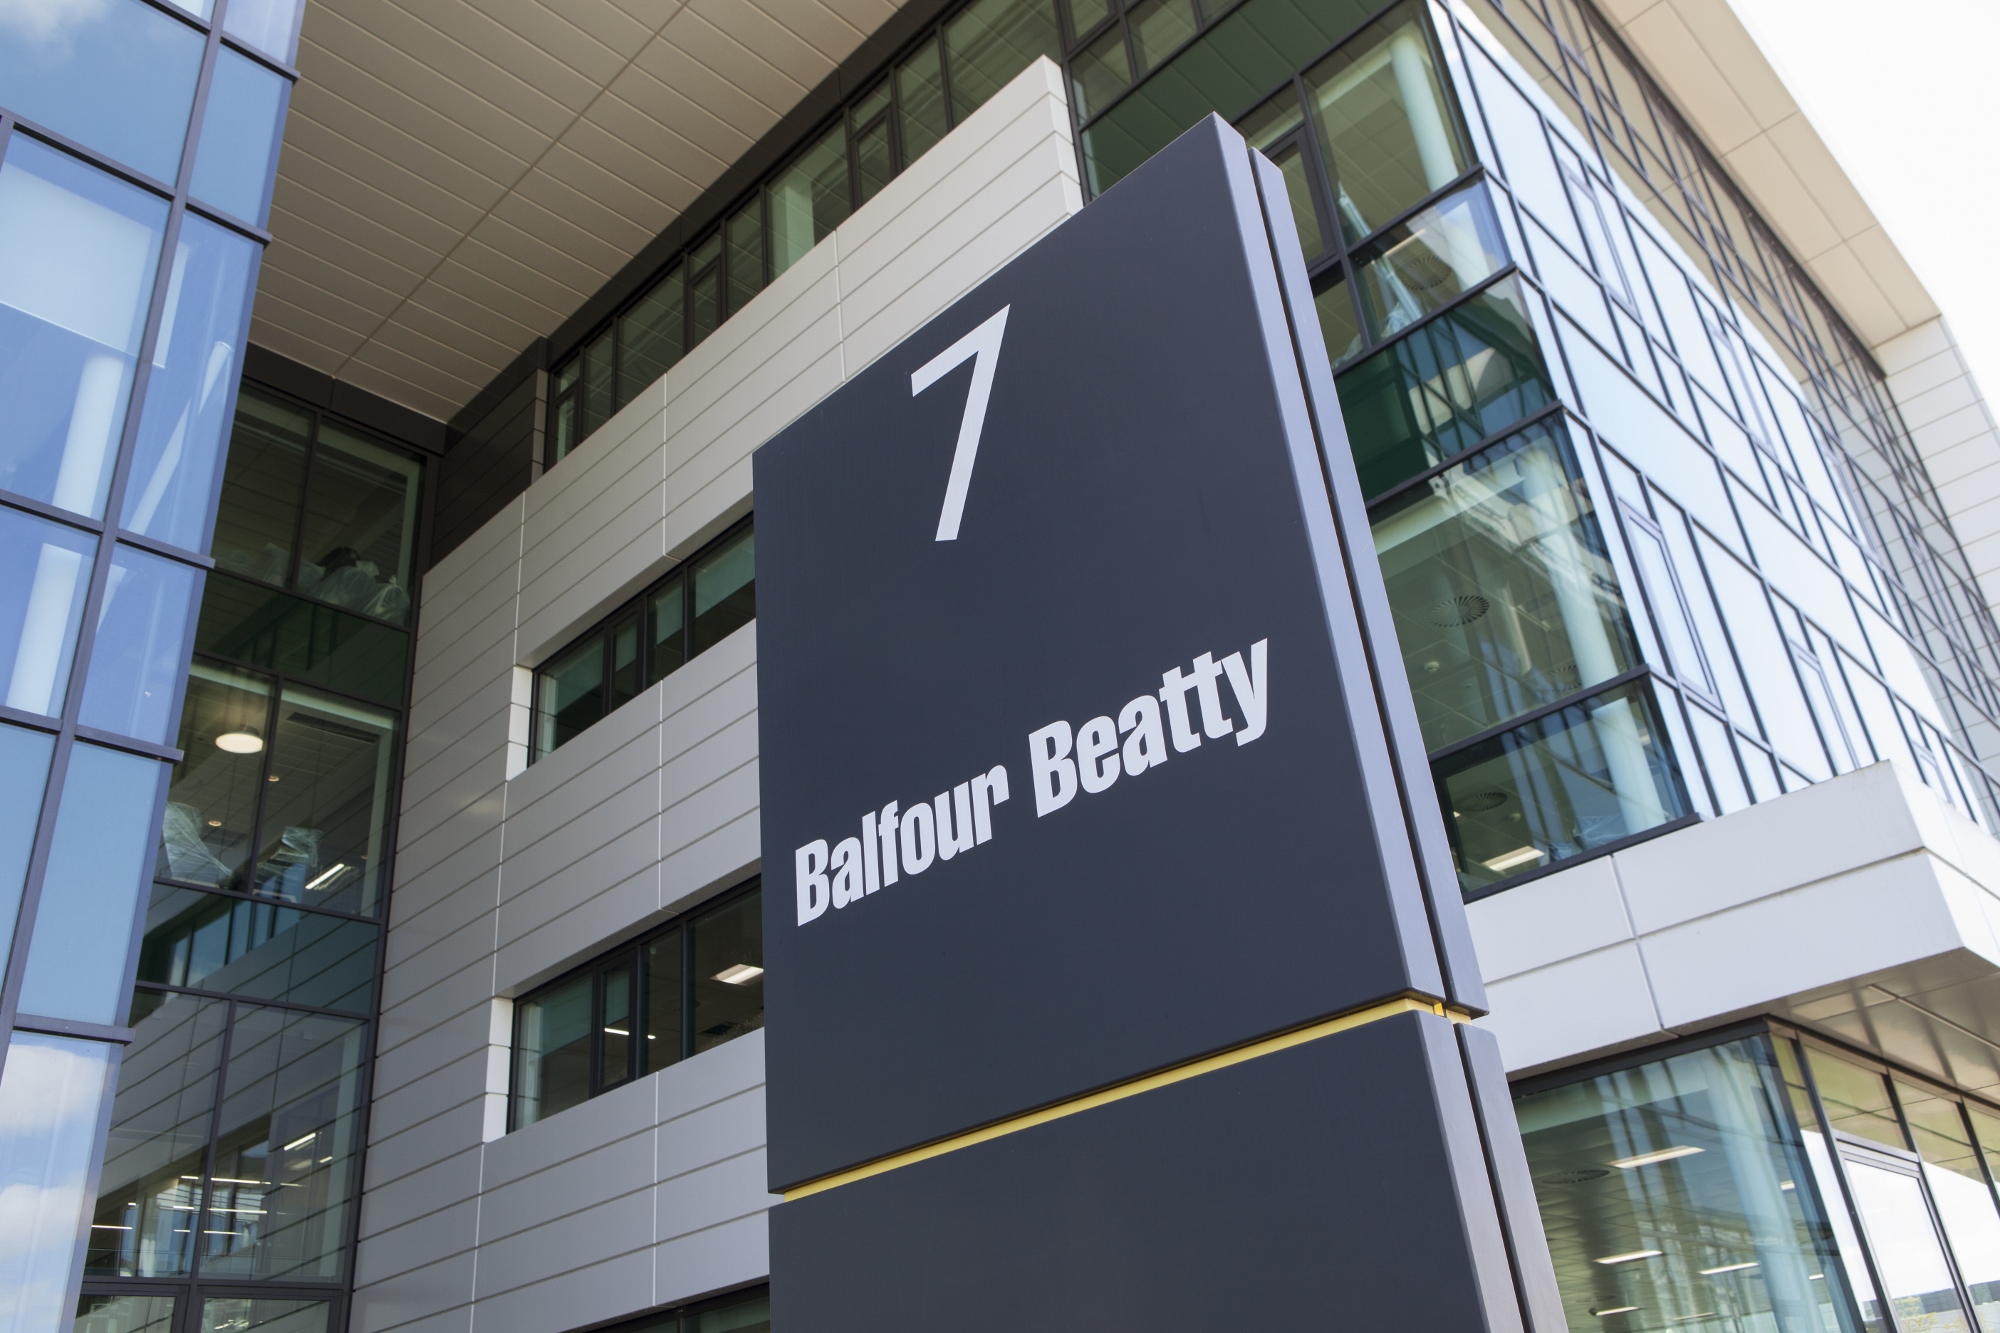 Trading returns to pre-pandemic levels at Balfour Beatty